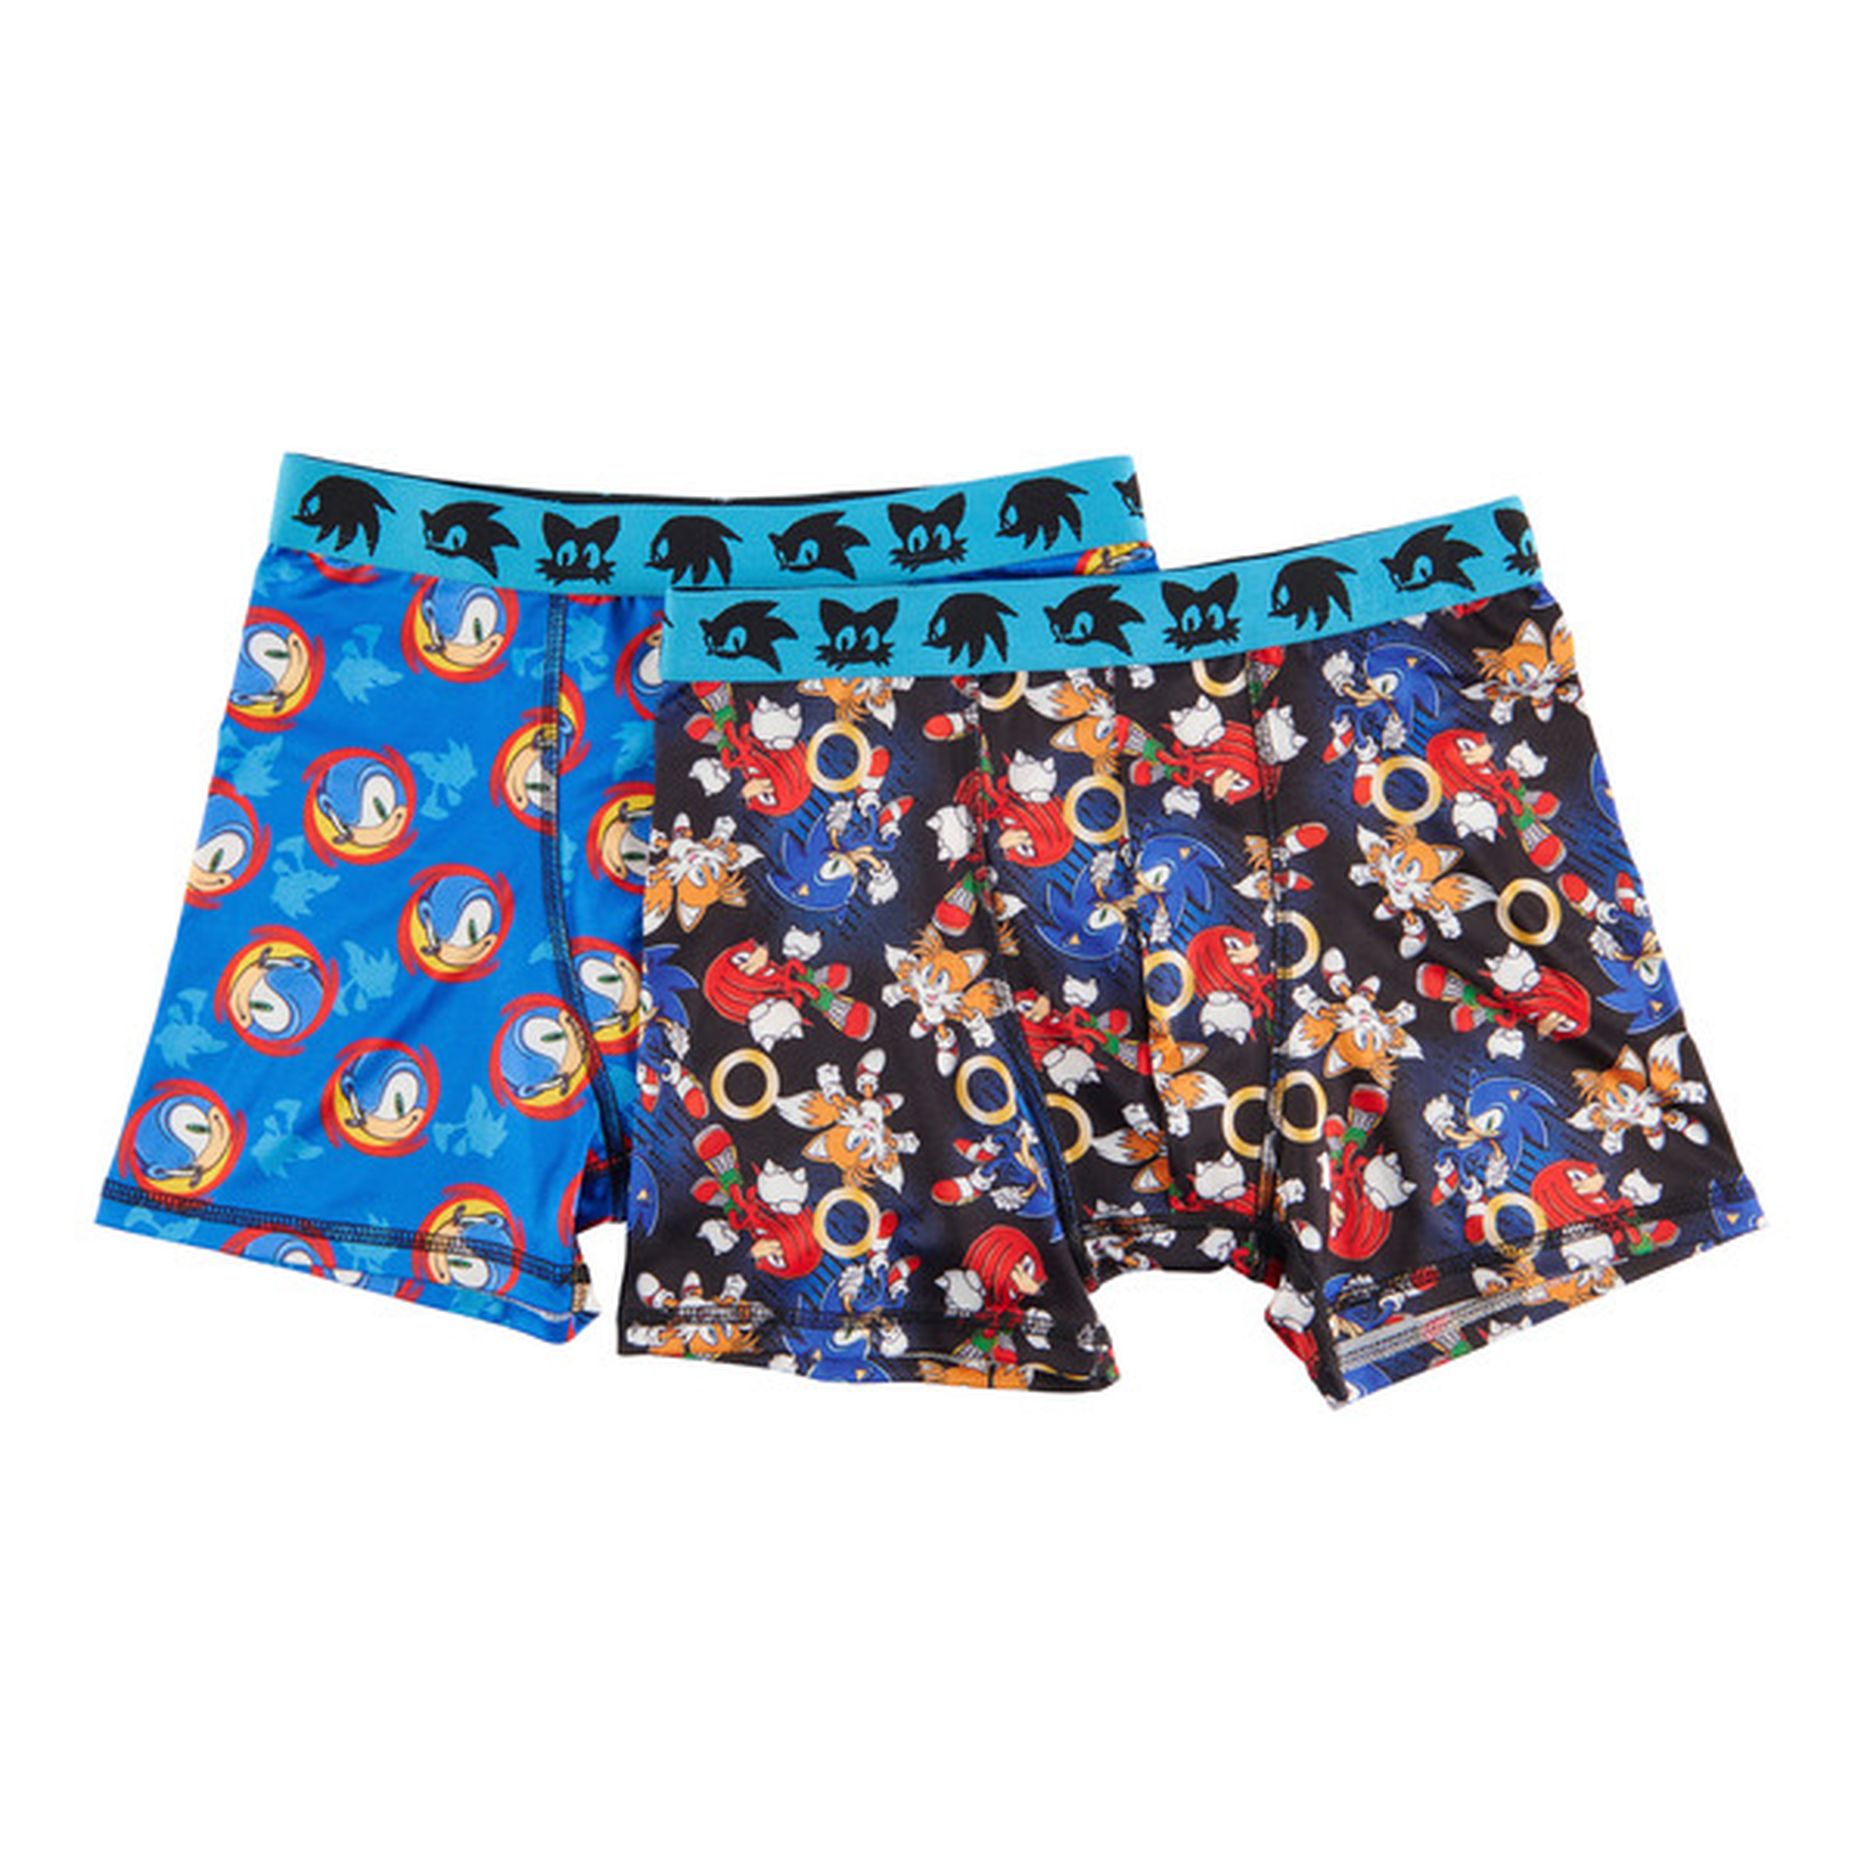 Boy's Sonic the Hedgehog Print Boxers (2 ct) Delivery or Pickup Near Me ...